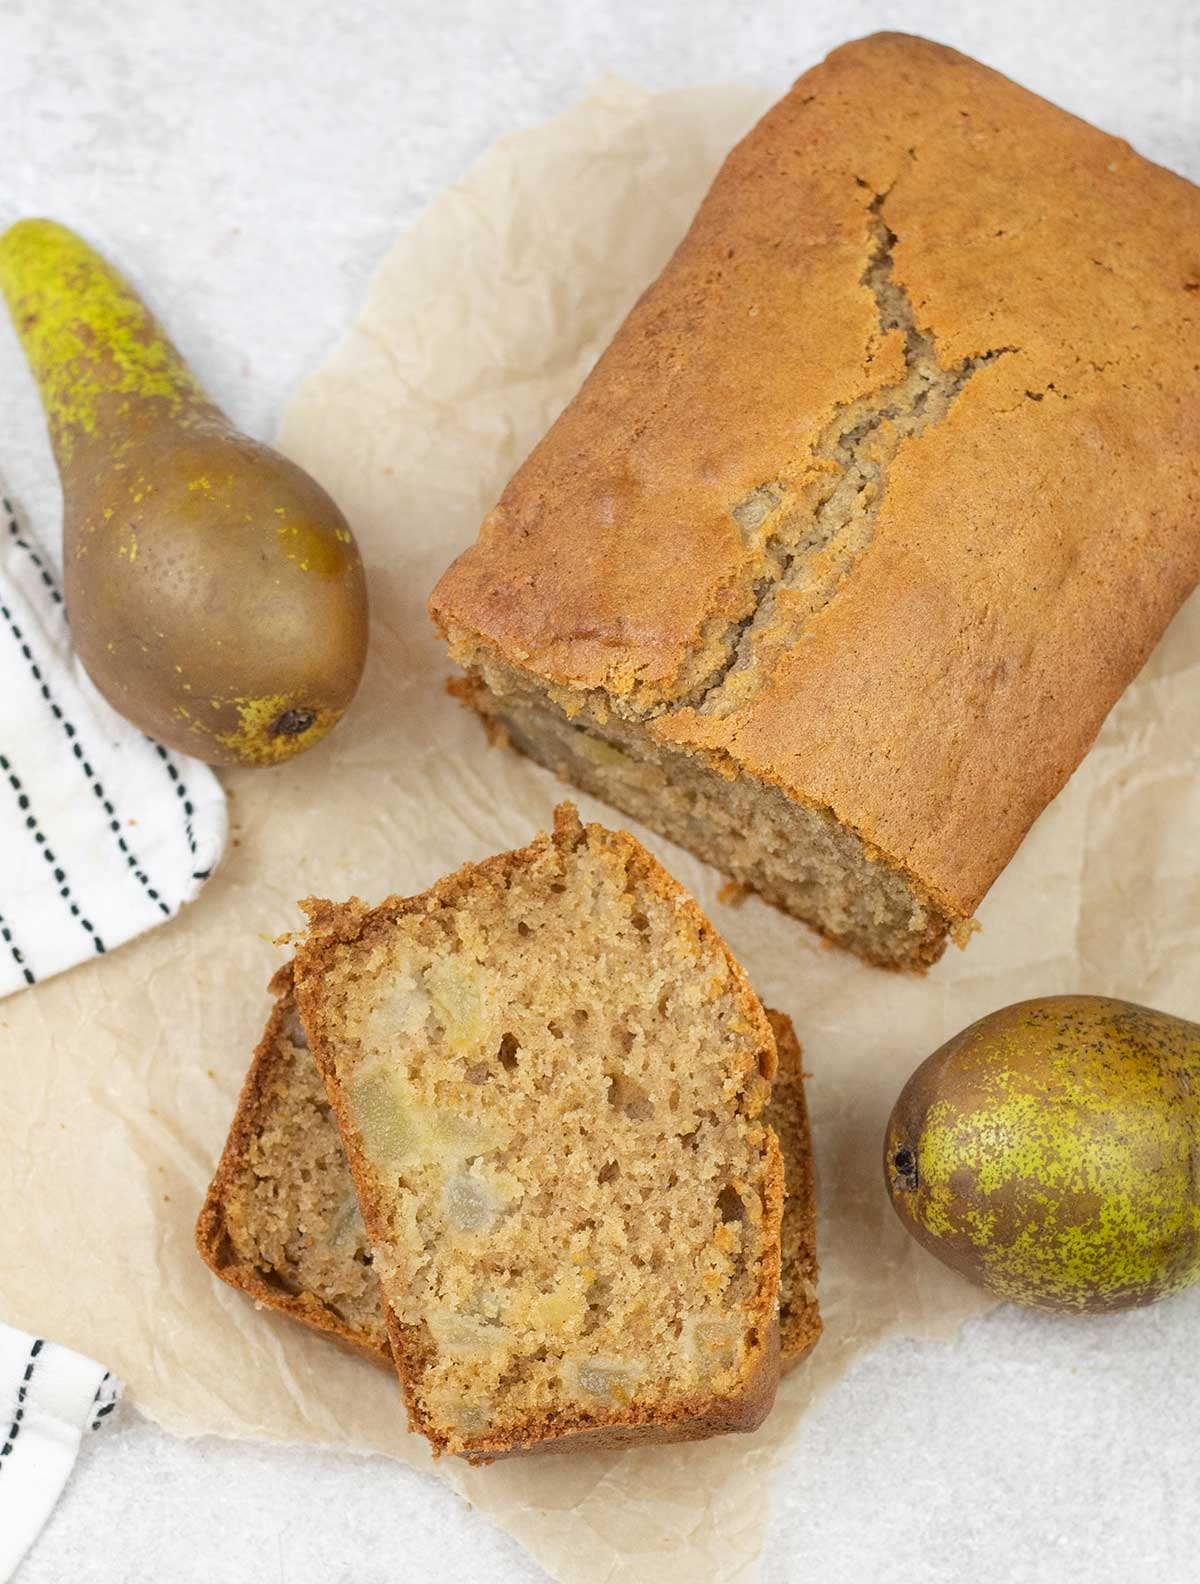 Pear Bread along with some pears around it